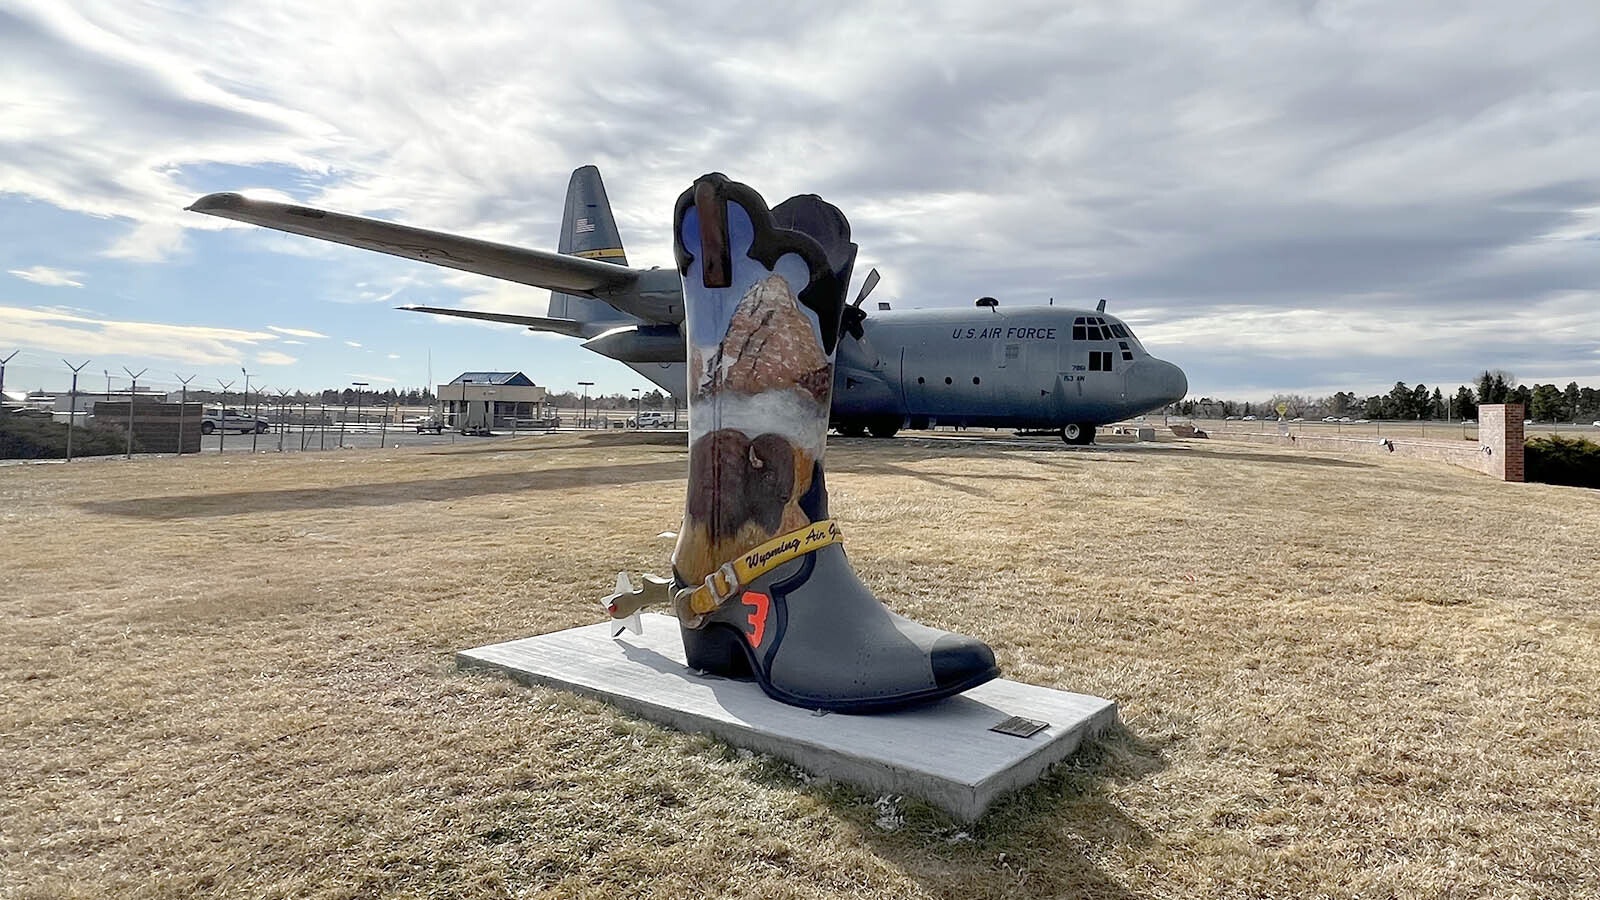 This new Big Boot at the entrance to the Wyoming National Guard honors the Guard's service to Wyoming.